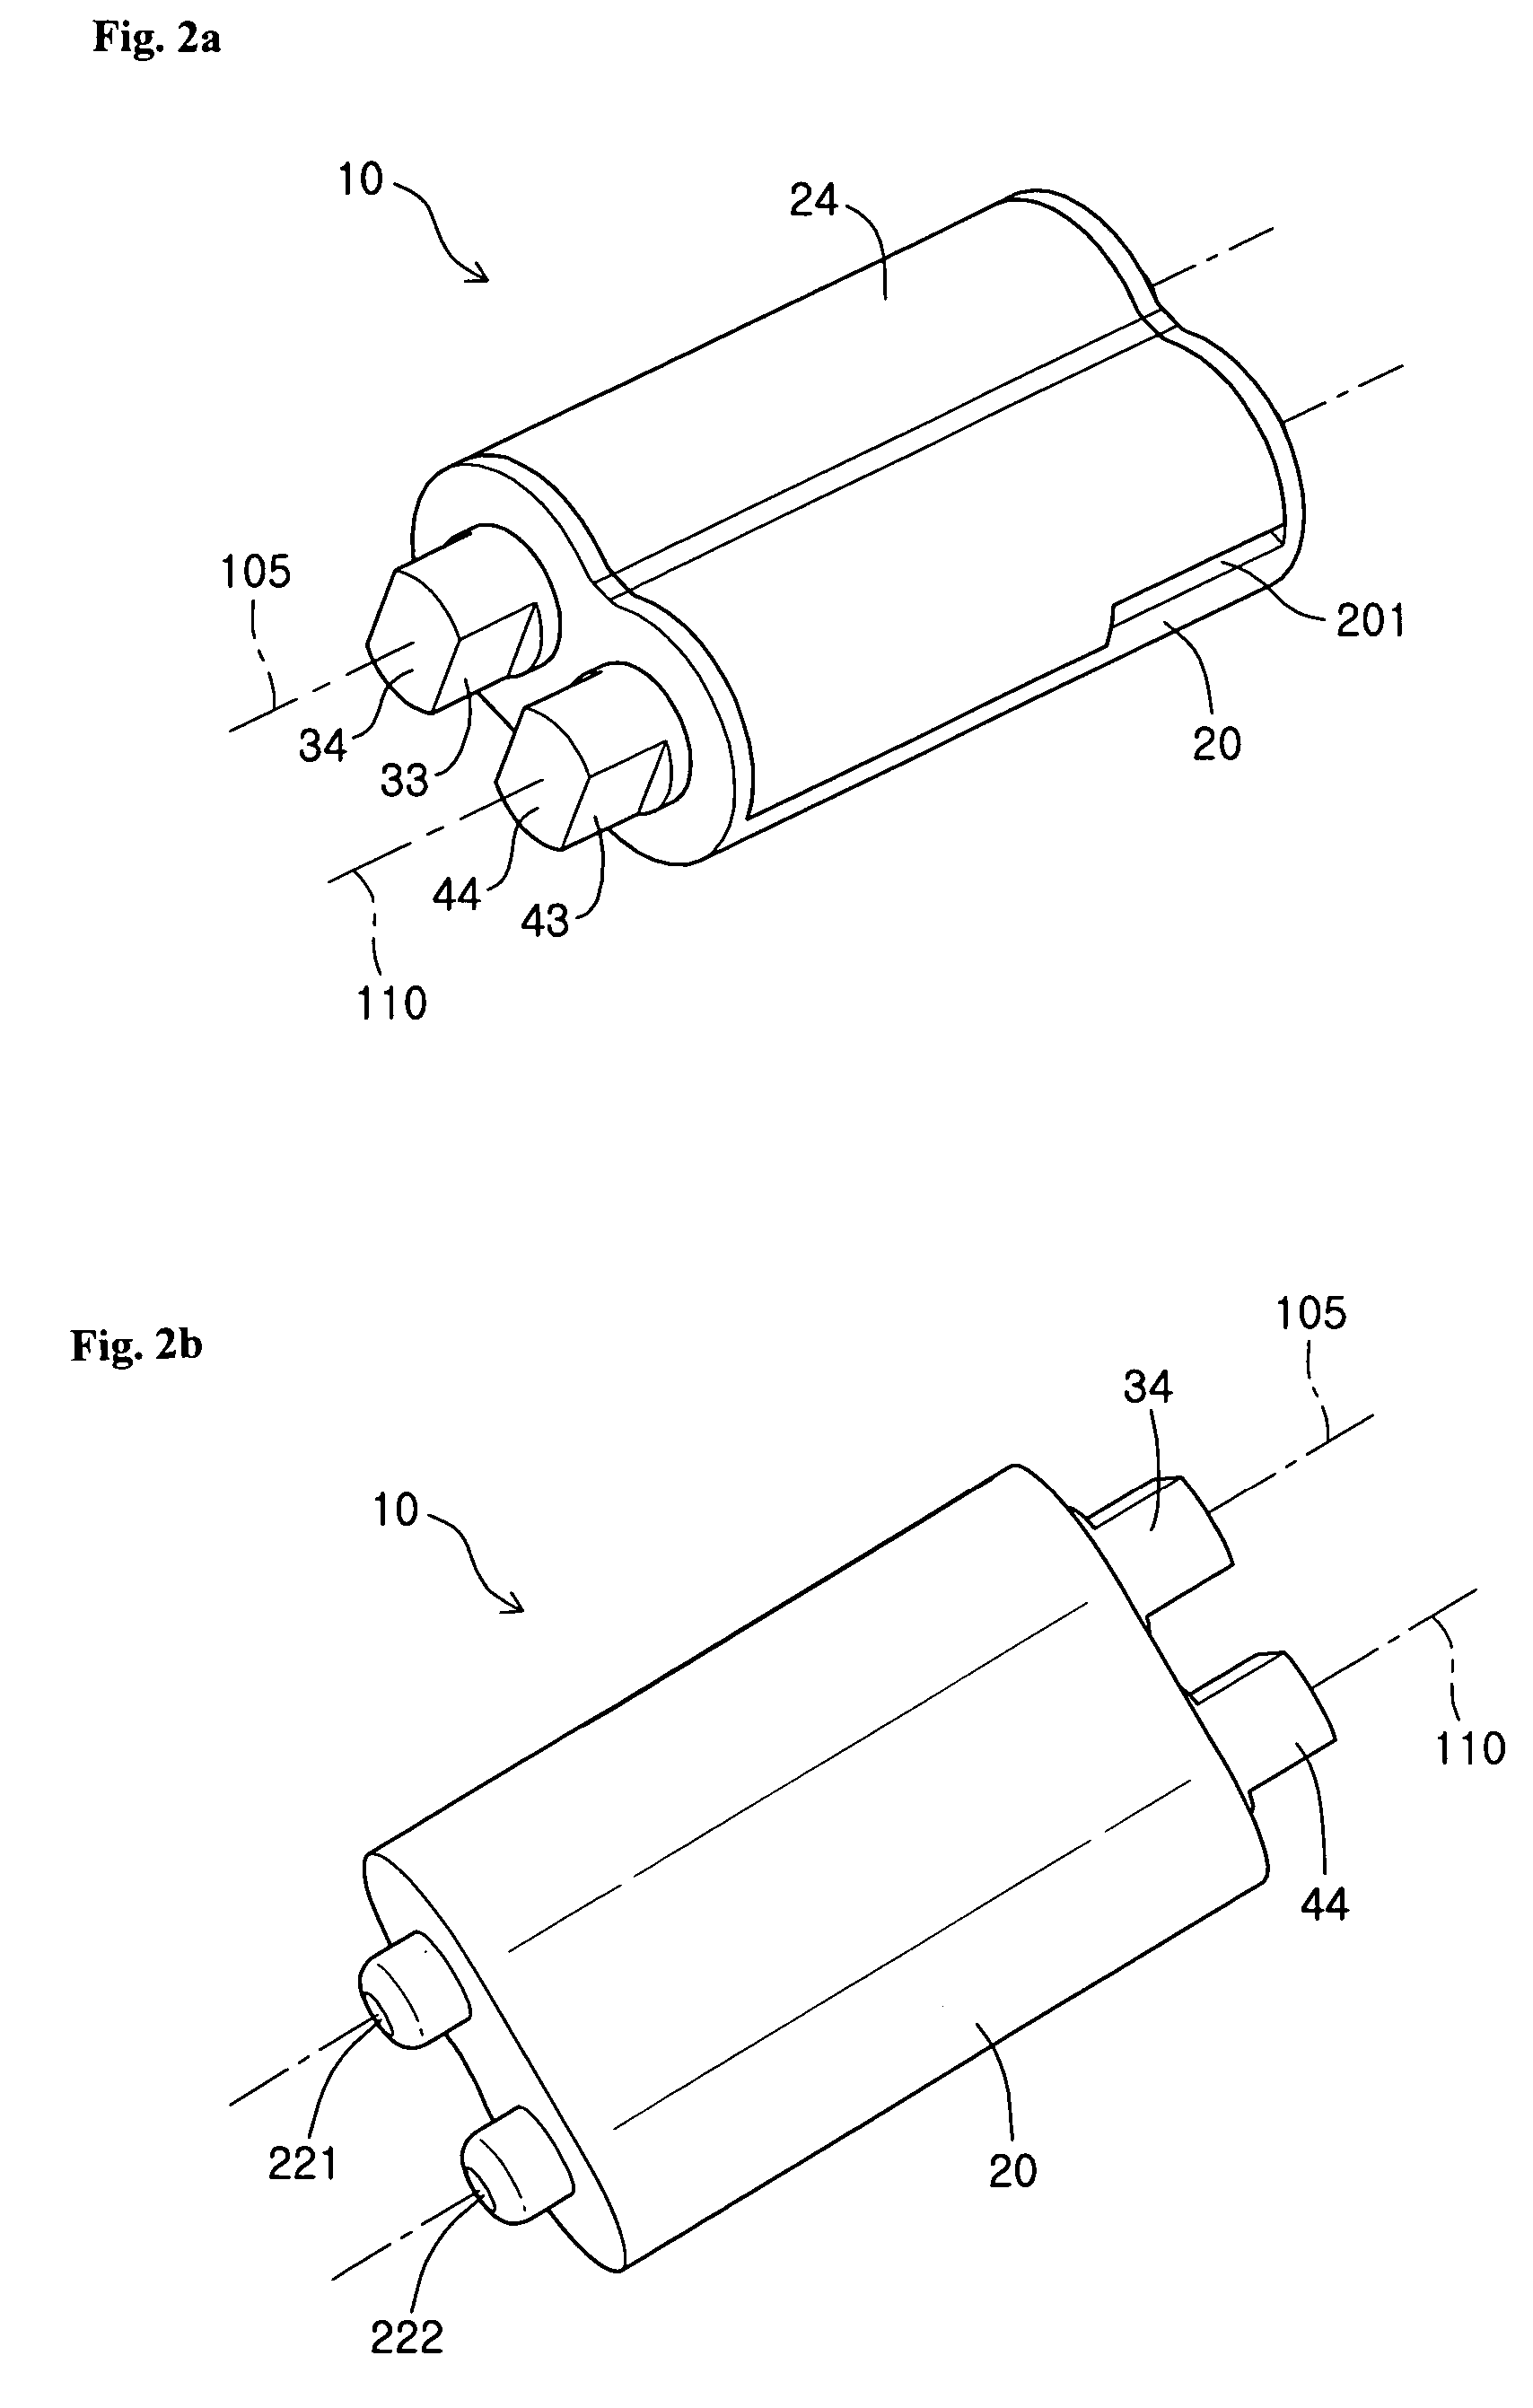 Hand-held electronic device including hinge device